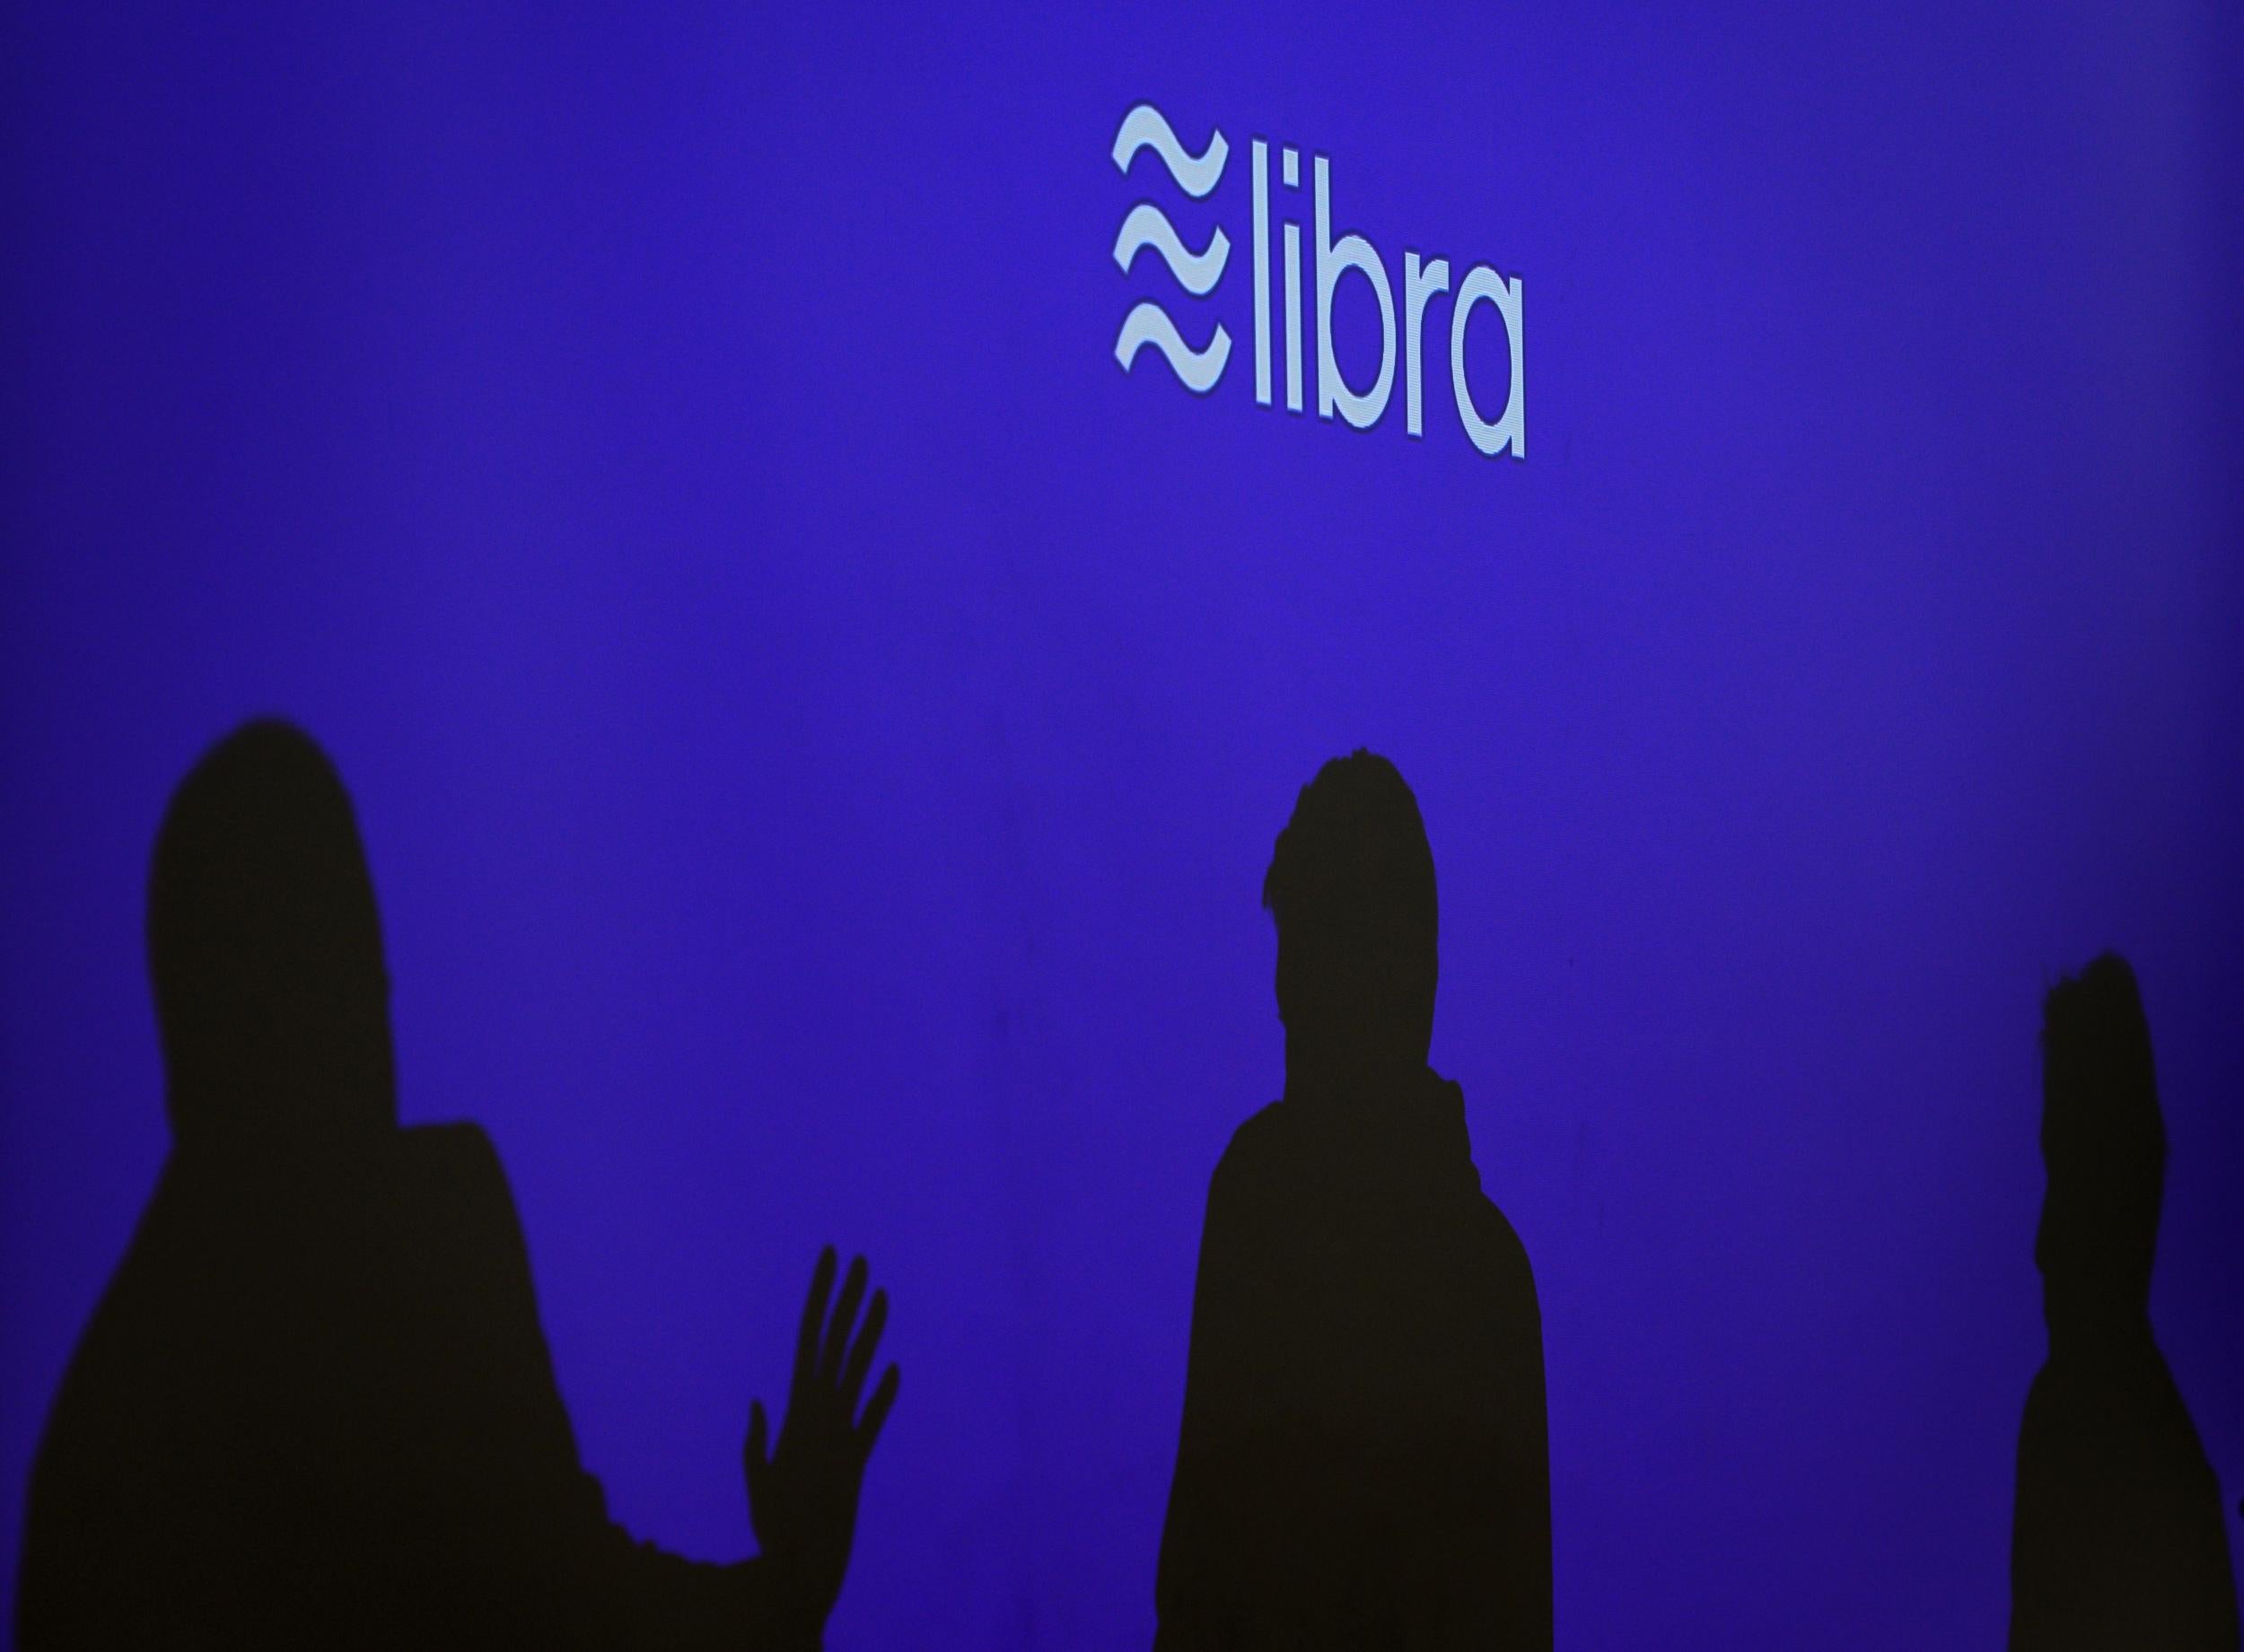 Payment giants back out of Facebook's Libra cryptocurrency, following PayPal